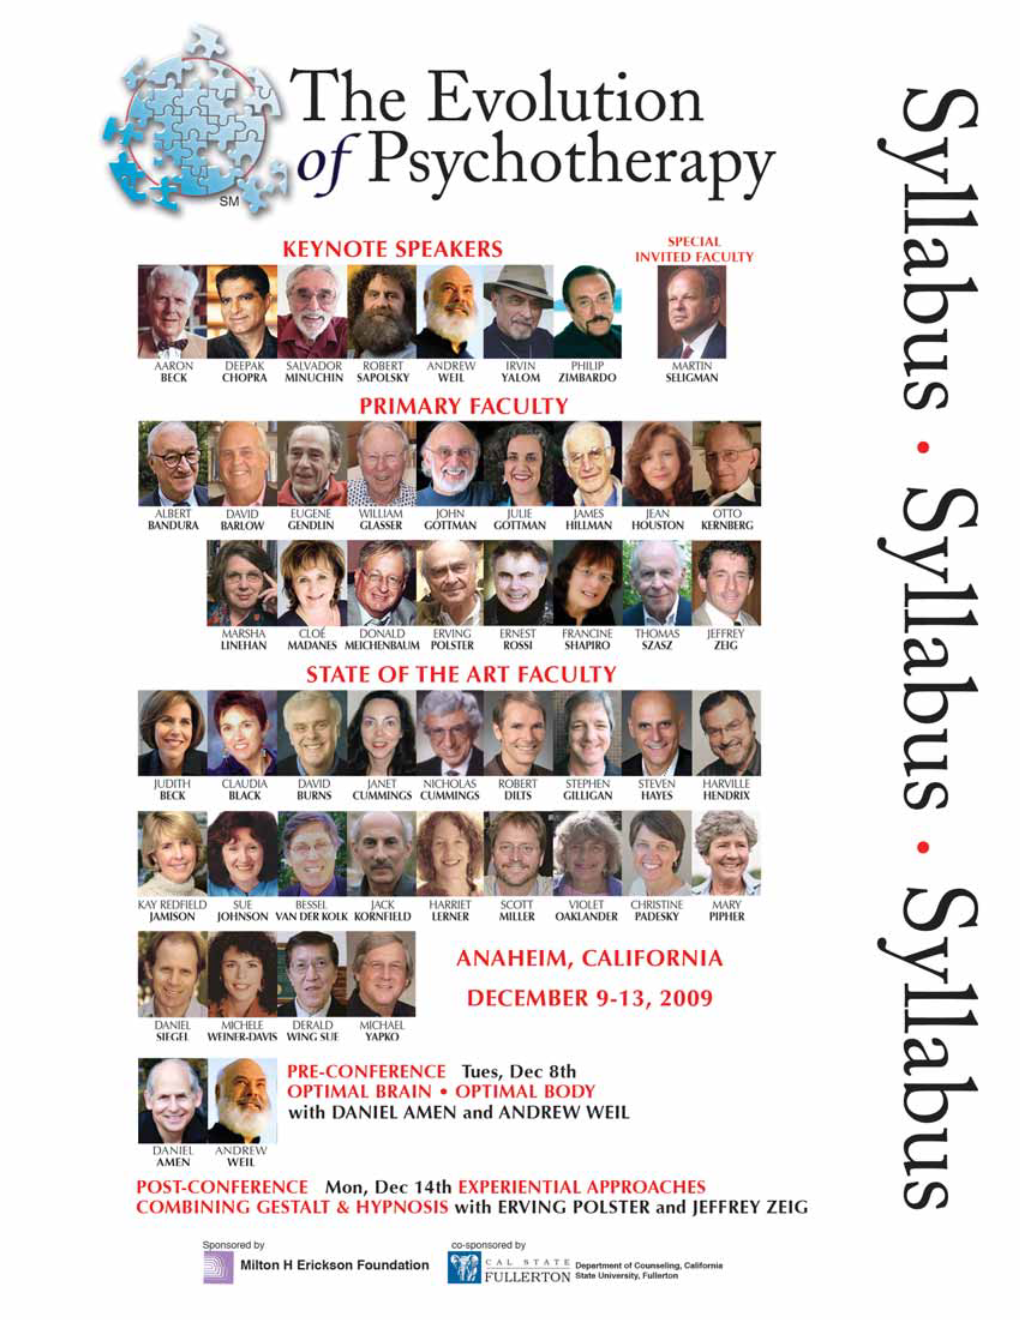 GENERAL INFORMATION About the Evolution of Psychotherapy Conference